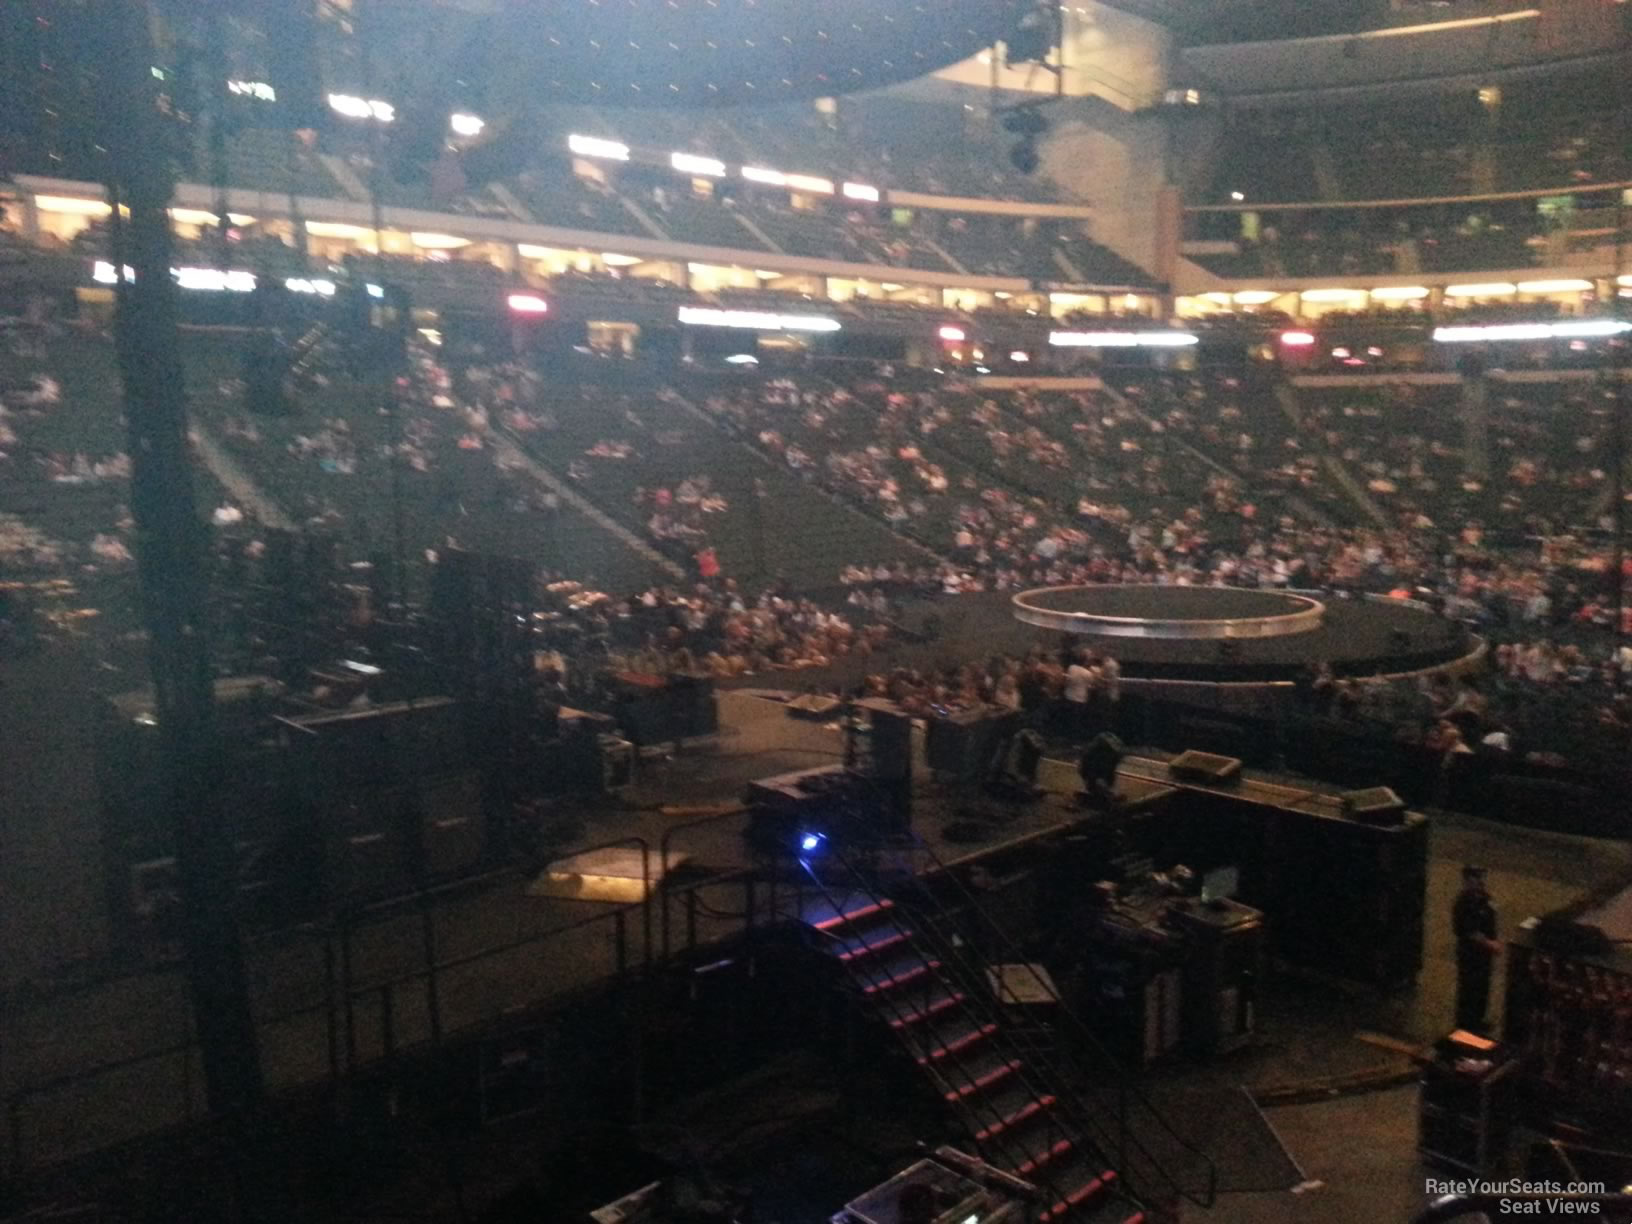 section 121, row 5 seat view  for concert - xcel energy center